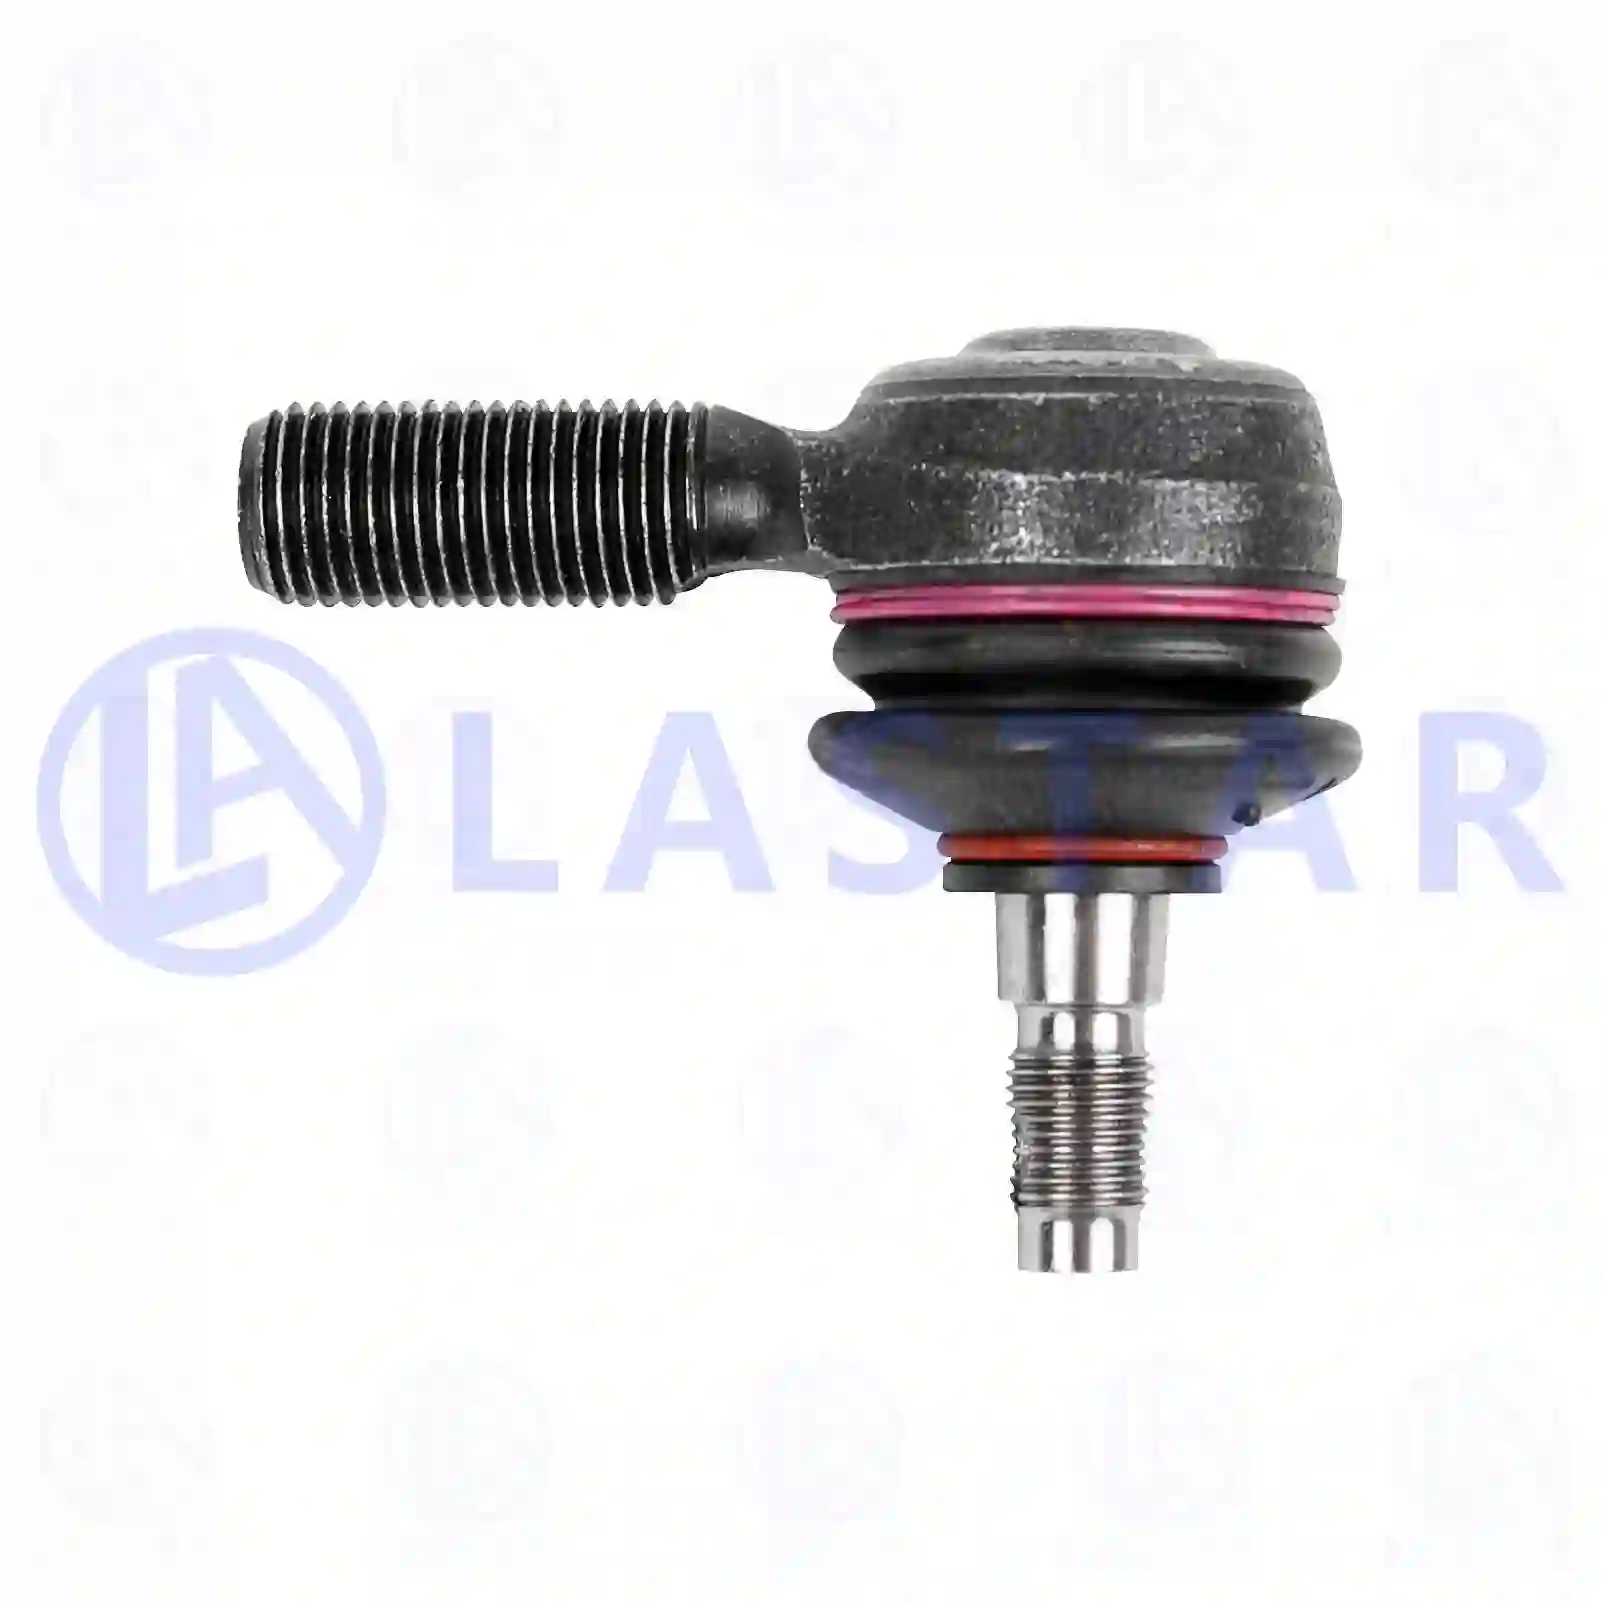 Ball joint, right hand thread, 77731753, 0002685989, 0009969645, , ||  77731753 Lastar Spare Part | Truck Spare Parts, Auotomotive Spare Parts Ball joint, right hand thread, 77731753, 0002685989, 0009969645, , ||  77731753 Lastar Spare Part | Truck Spare Parts, Auotomotive Spare Parts